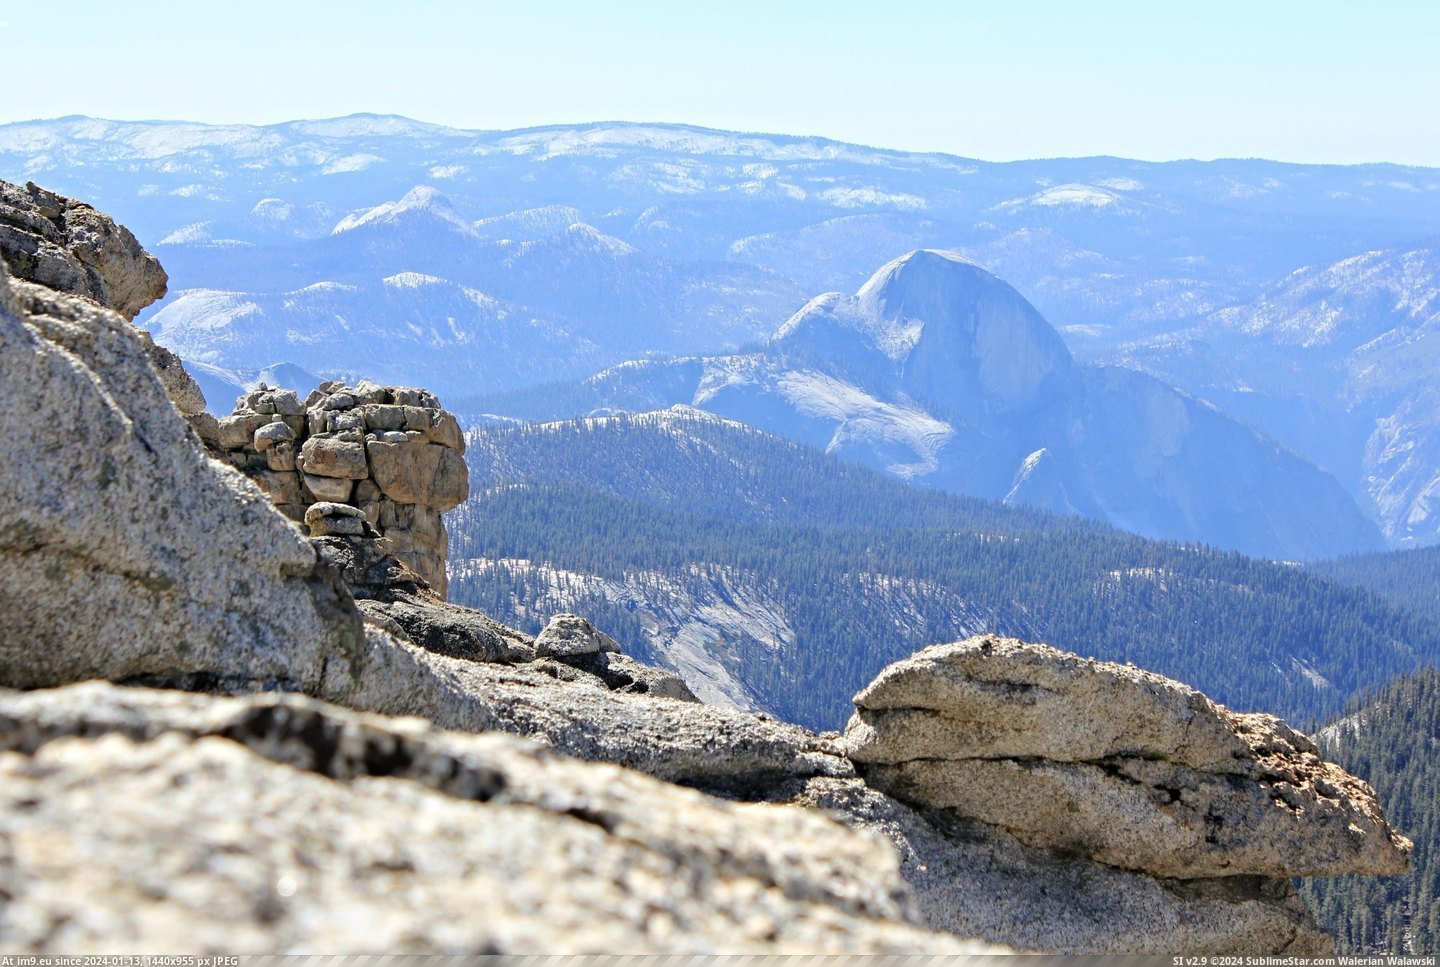 #Feet #Yosemite #Dome #Degree #Providing #Mount #Panoramic [Earthporn] 2,000 feet above Half Dome is towering Mount Hoffman, providing a 360 degree panoramic view of Yosemite and the Sier Pic. (Bild von album My r/EARTHPORN favs))